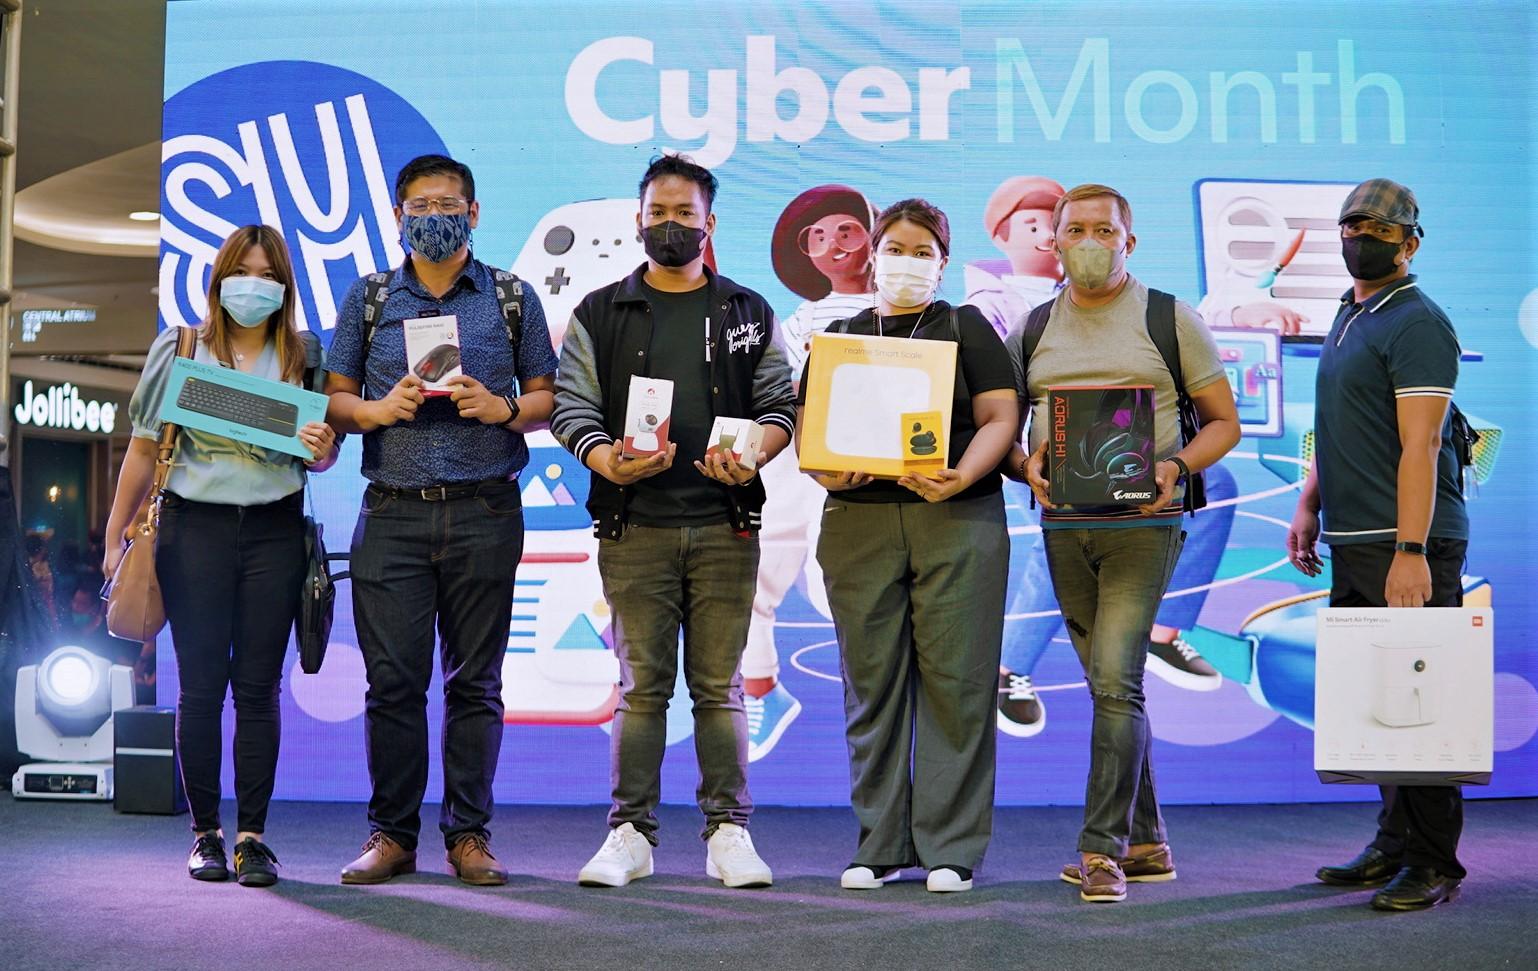 5 Things you can do at SM this Cyber Month